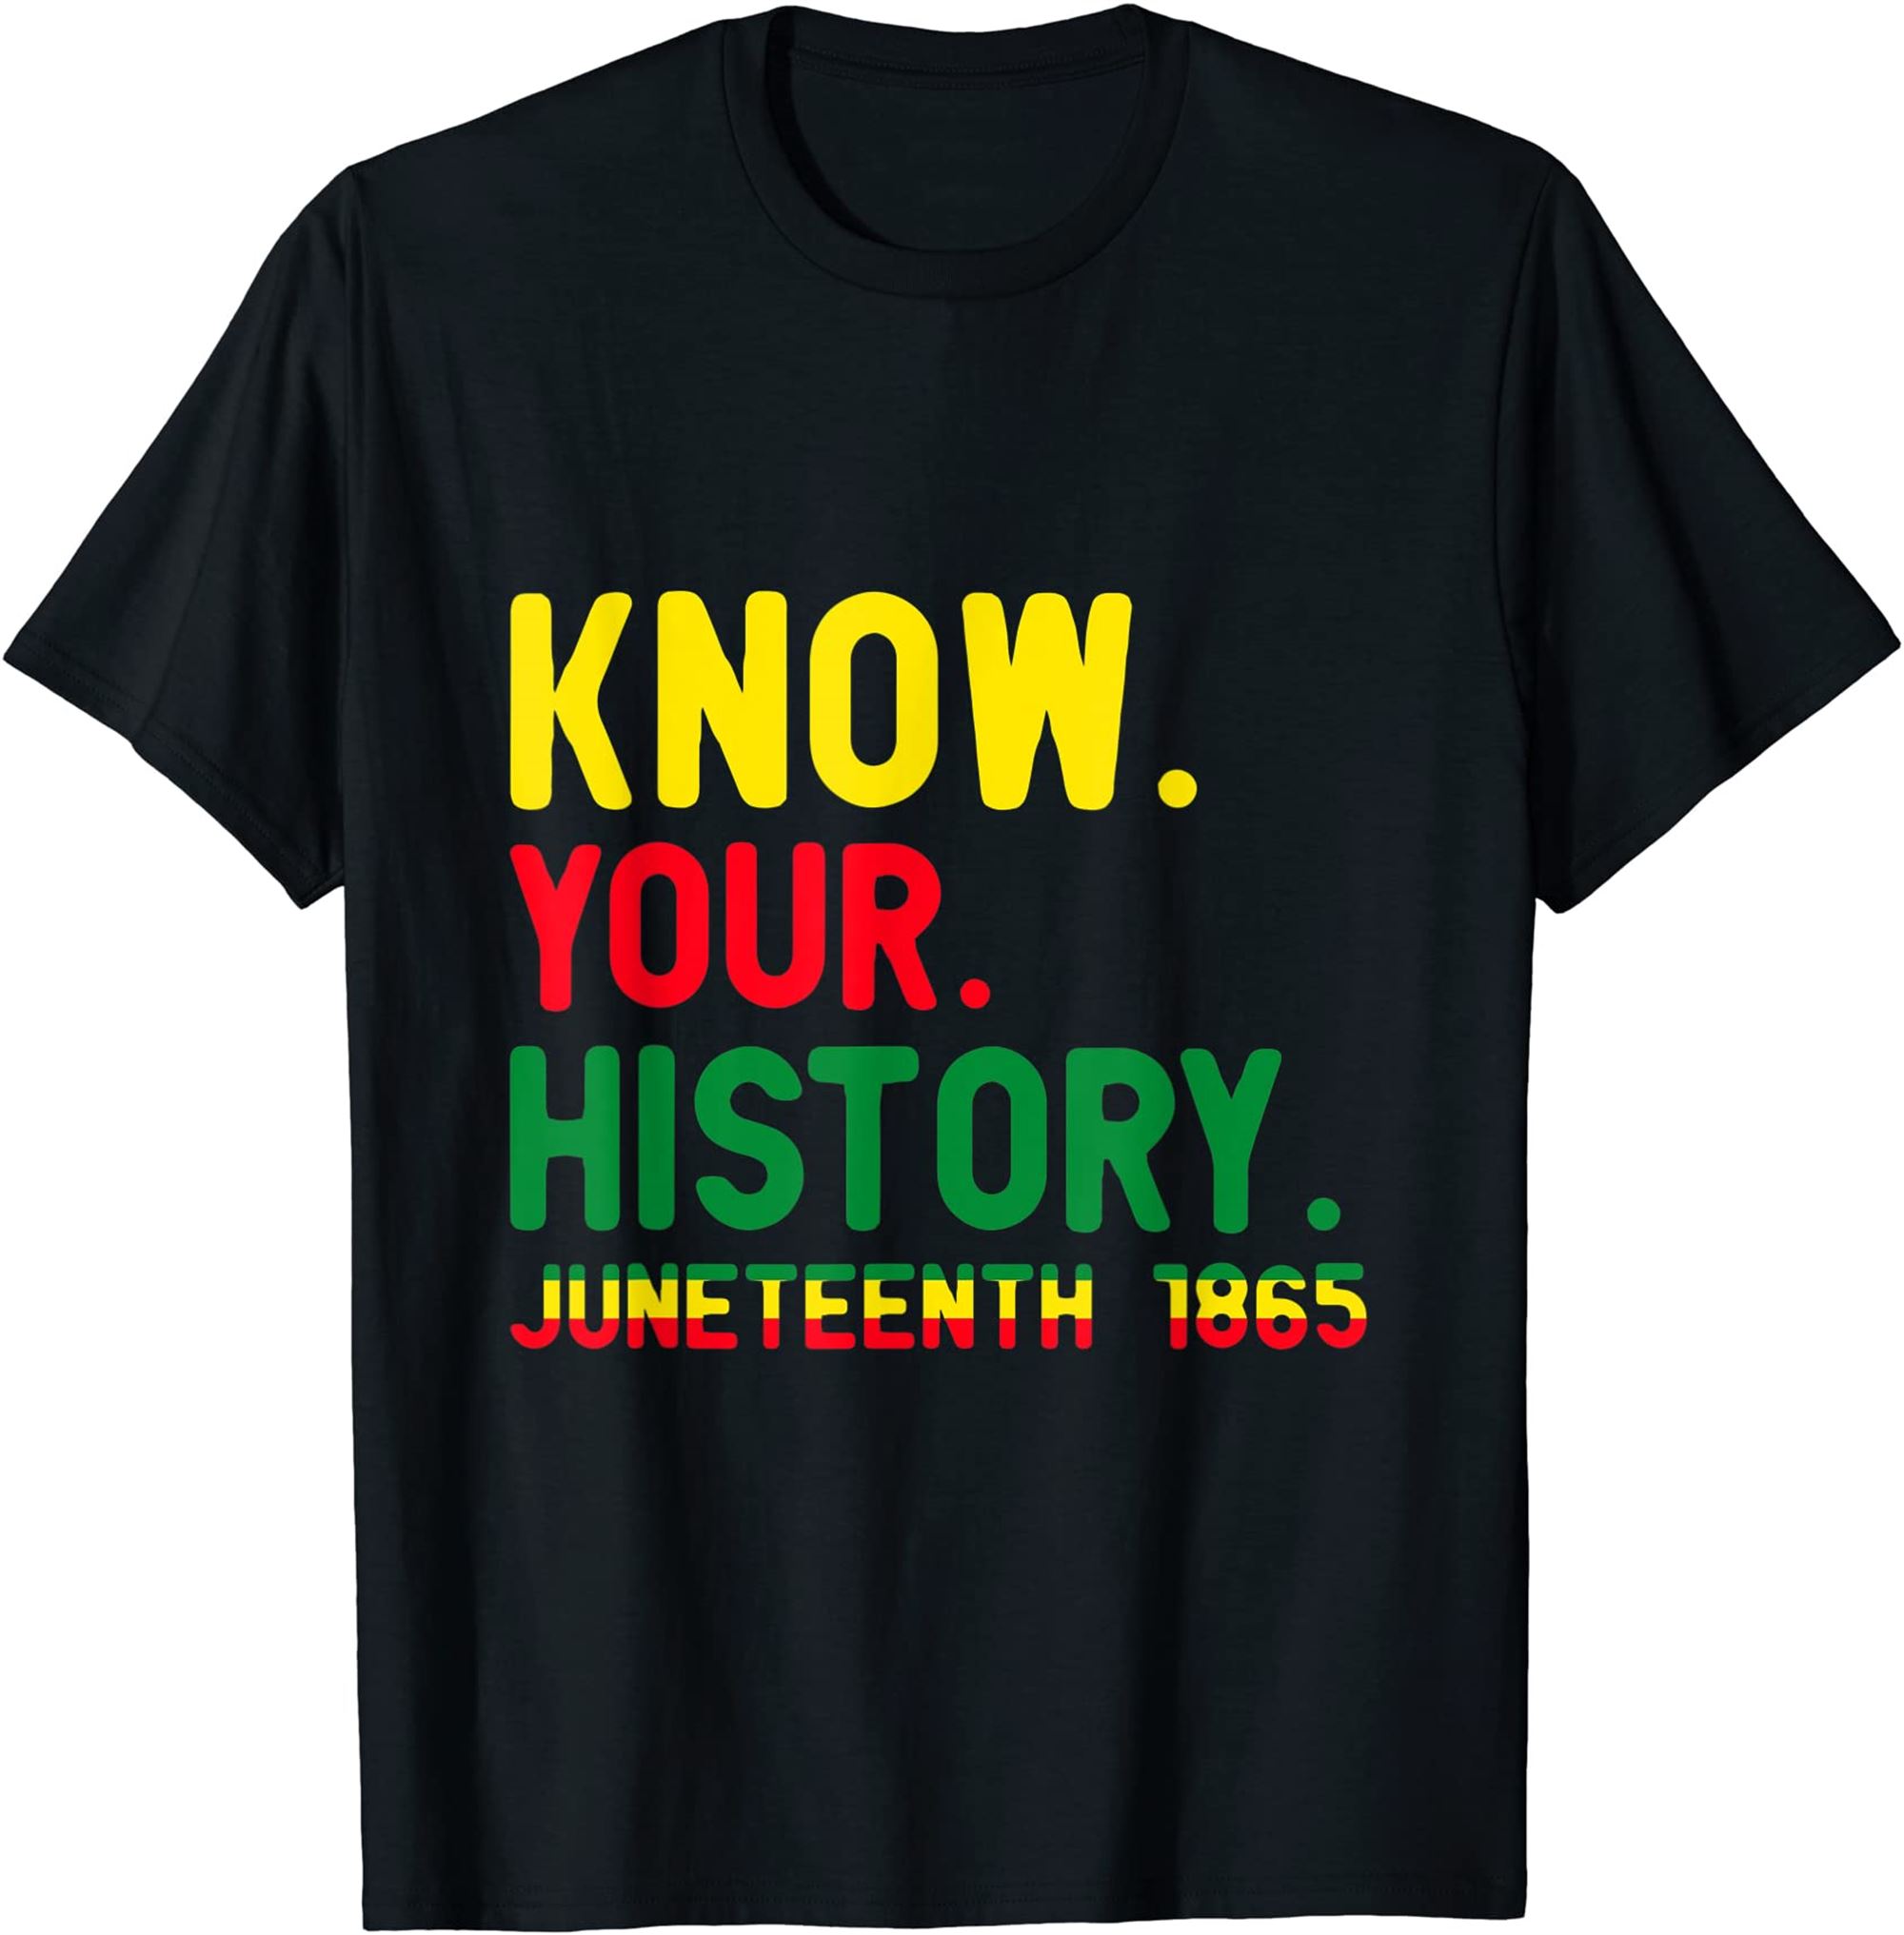 Juneteenth Tshirt Women Men Boy Girl Know Your History 1865 T-shirt Plus Size Up To 5xl